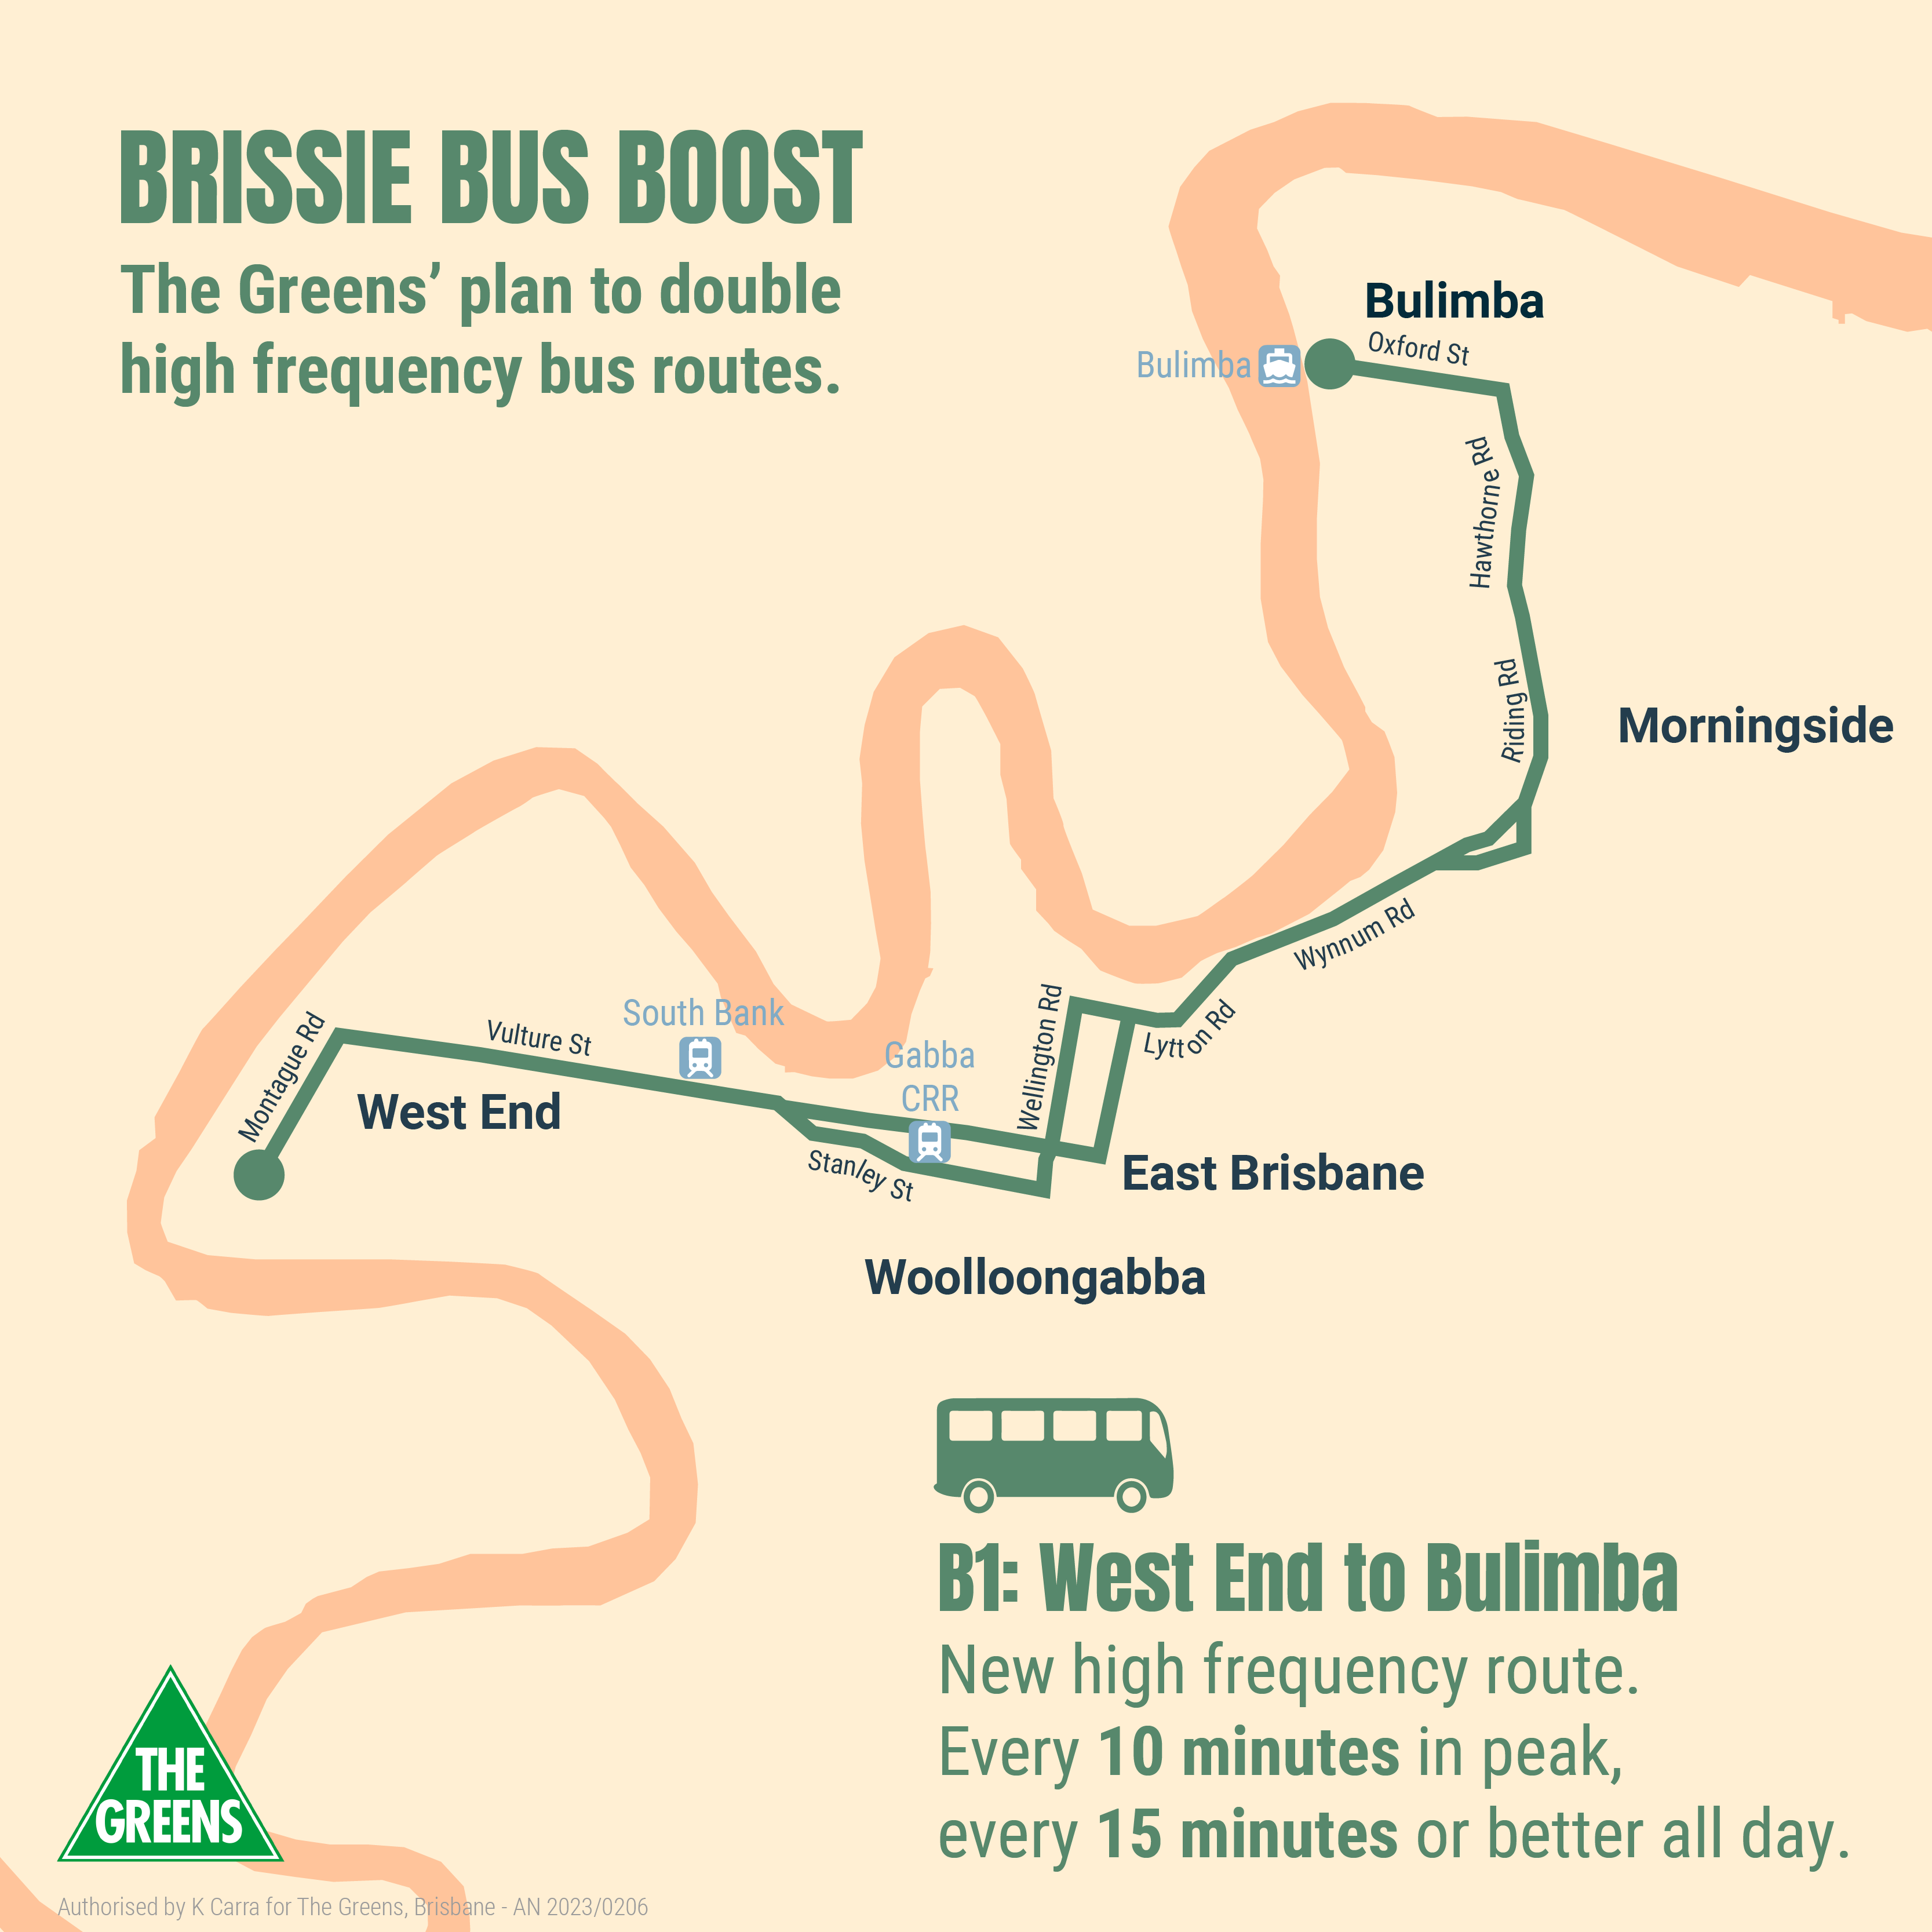 Proposed bus route from West End to Bulimba